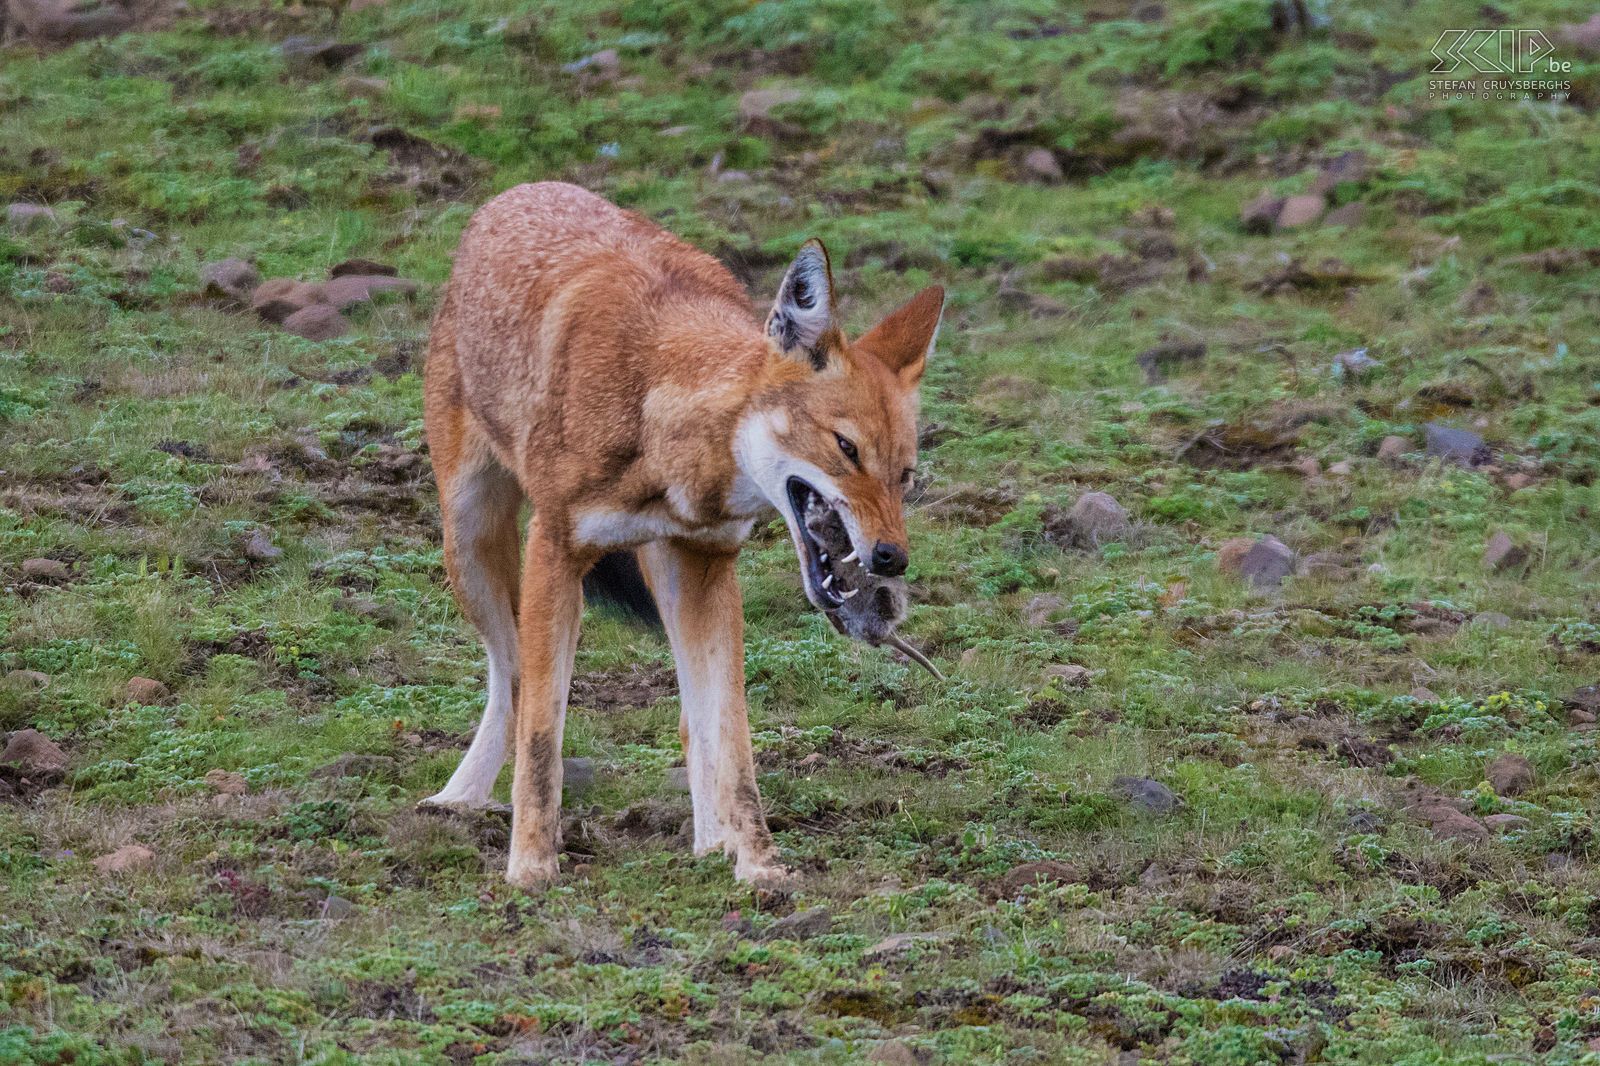 Bale Mountains - Sanetti - Ethiopian wolf eats a rat The Ethiopian wolf is a highly specialised hunter of Afroalpine rodents like giant mole rats, grass rats, hares and rock hyraxes. We were able to observe and photograph a wolf that chased a rat out of its hole and finally ate it. It was a fascinating spectacle. Stefan Cruysberghs